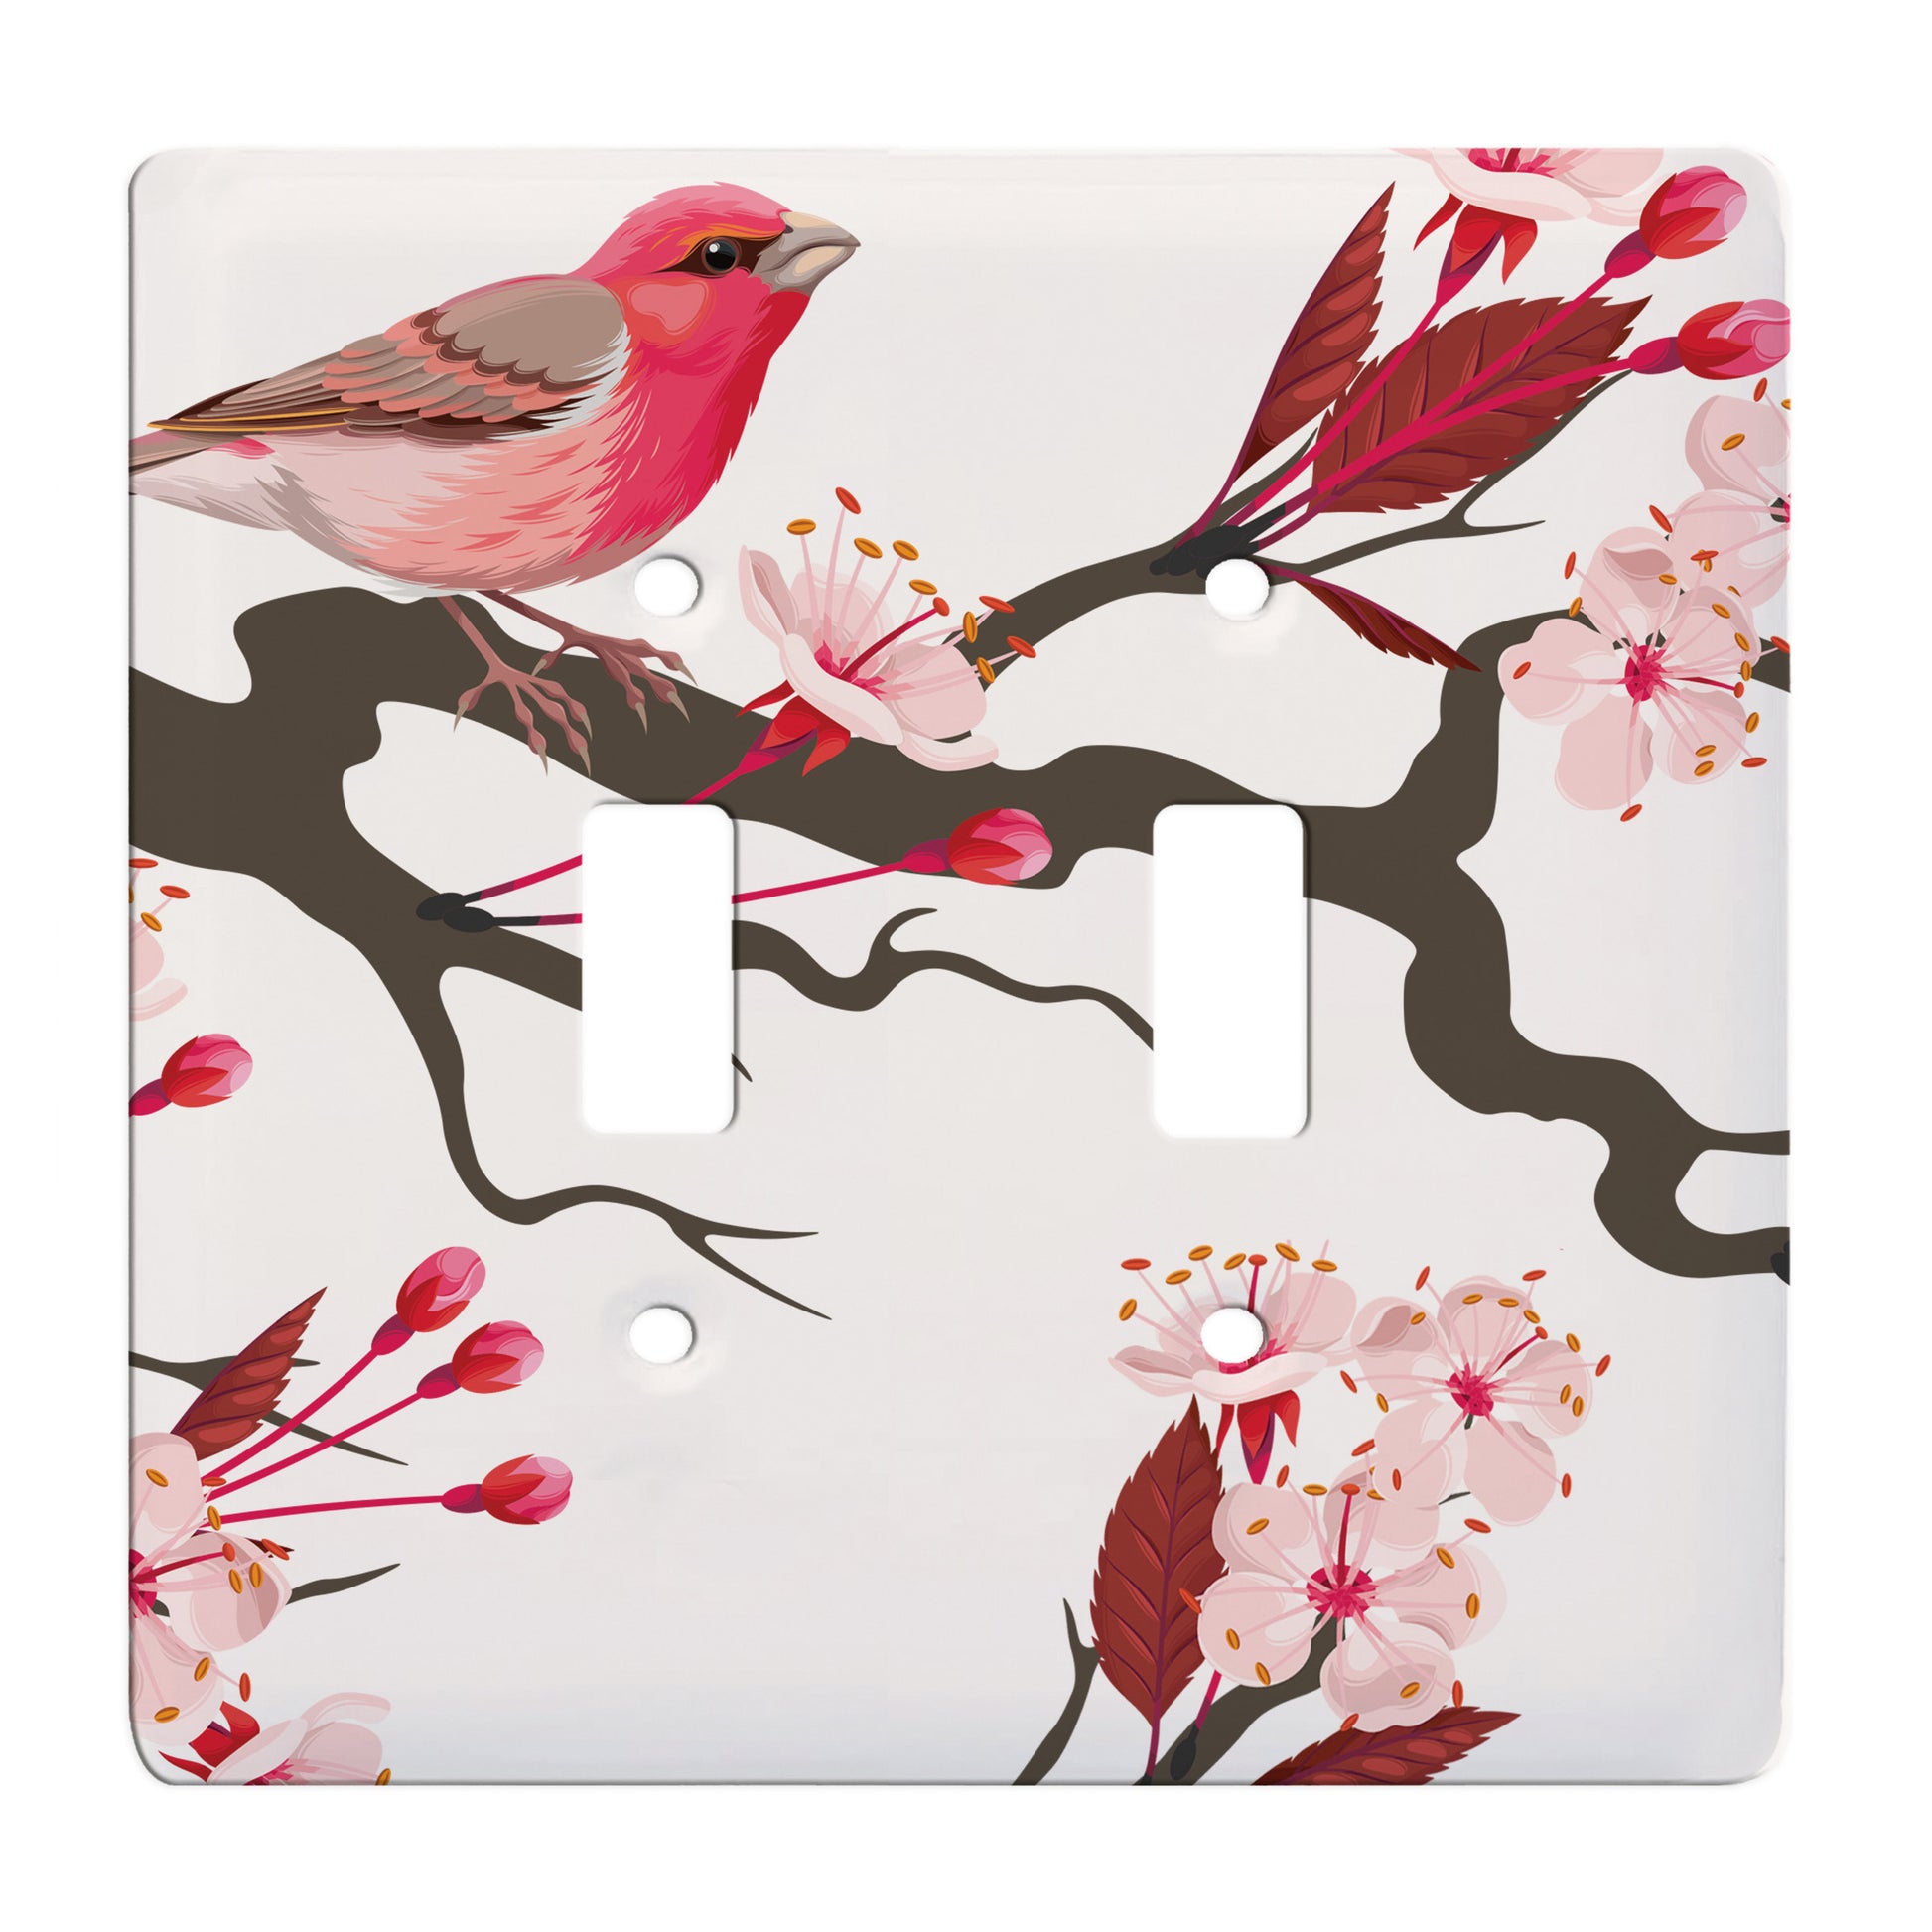 white ceramic double toggle switch plate featuring a finch sitting upon a tree branch with blossom flowers.